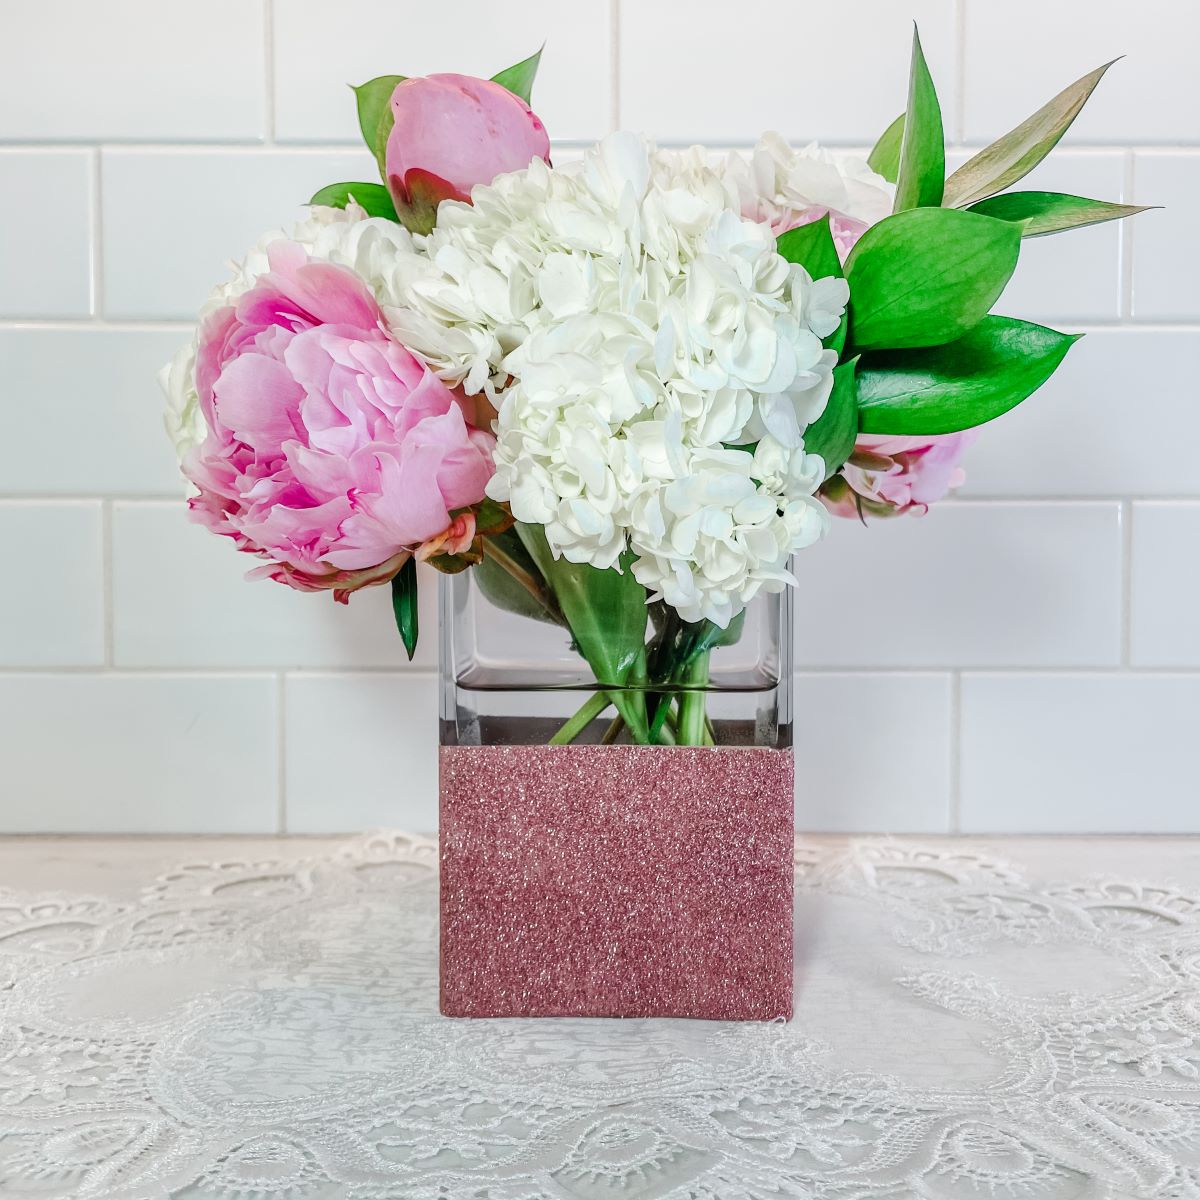 How to Make a DIY Glitter Vase for Your Wedding